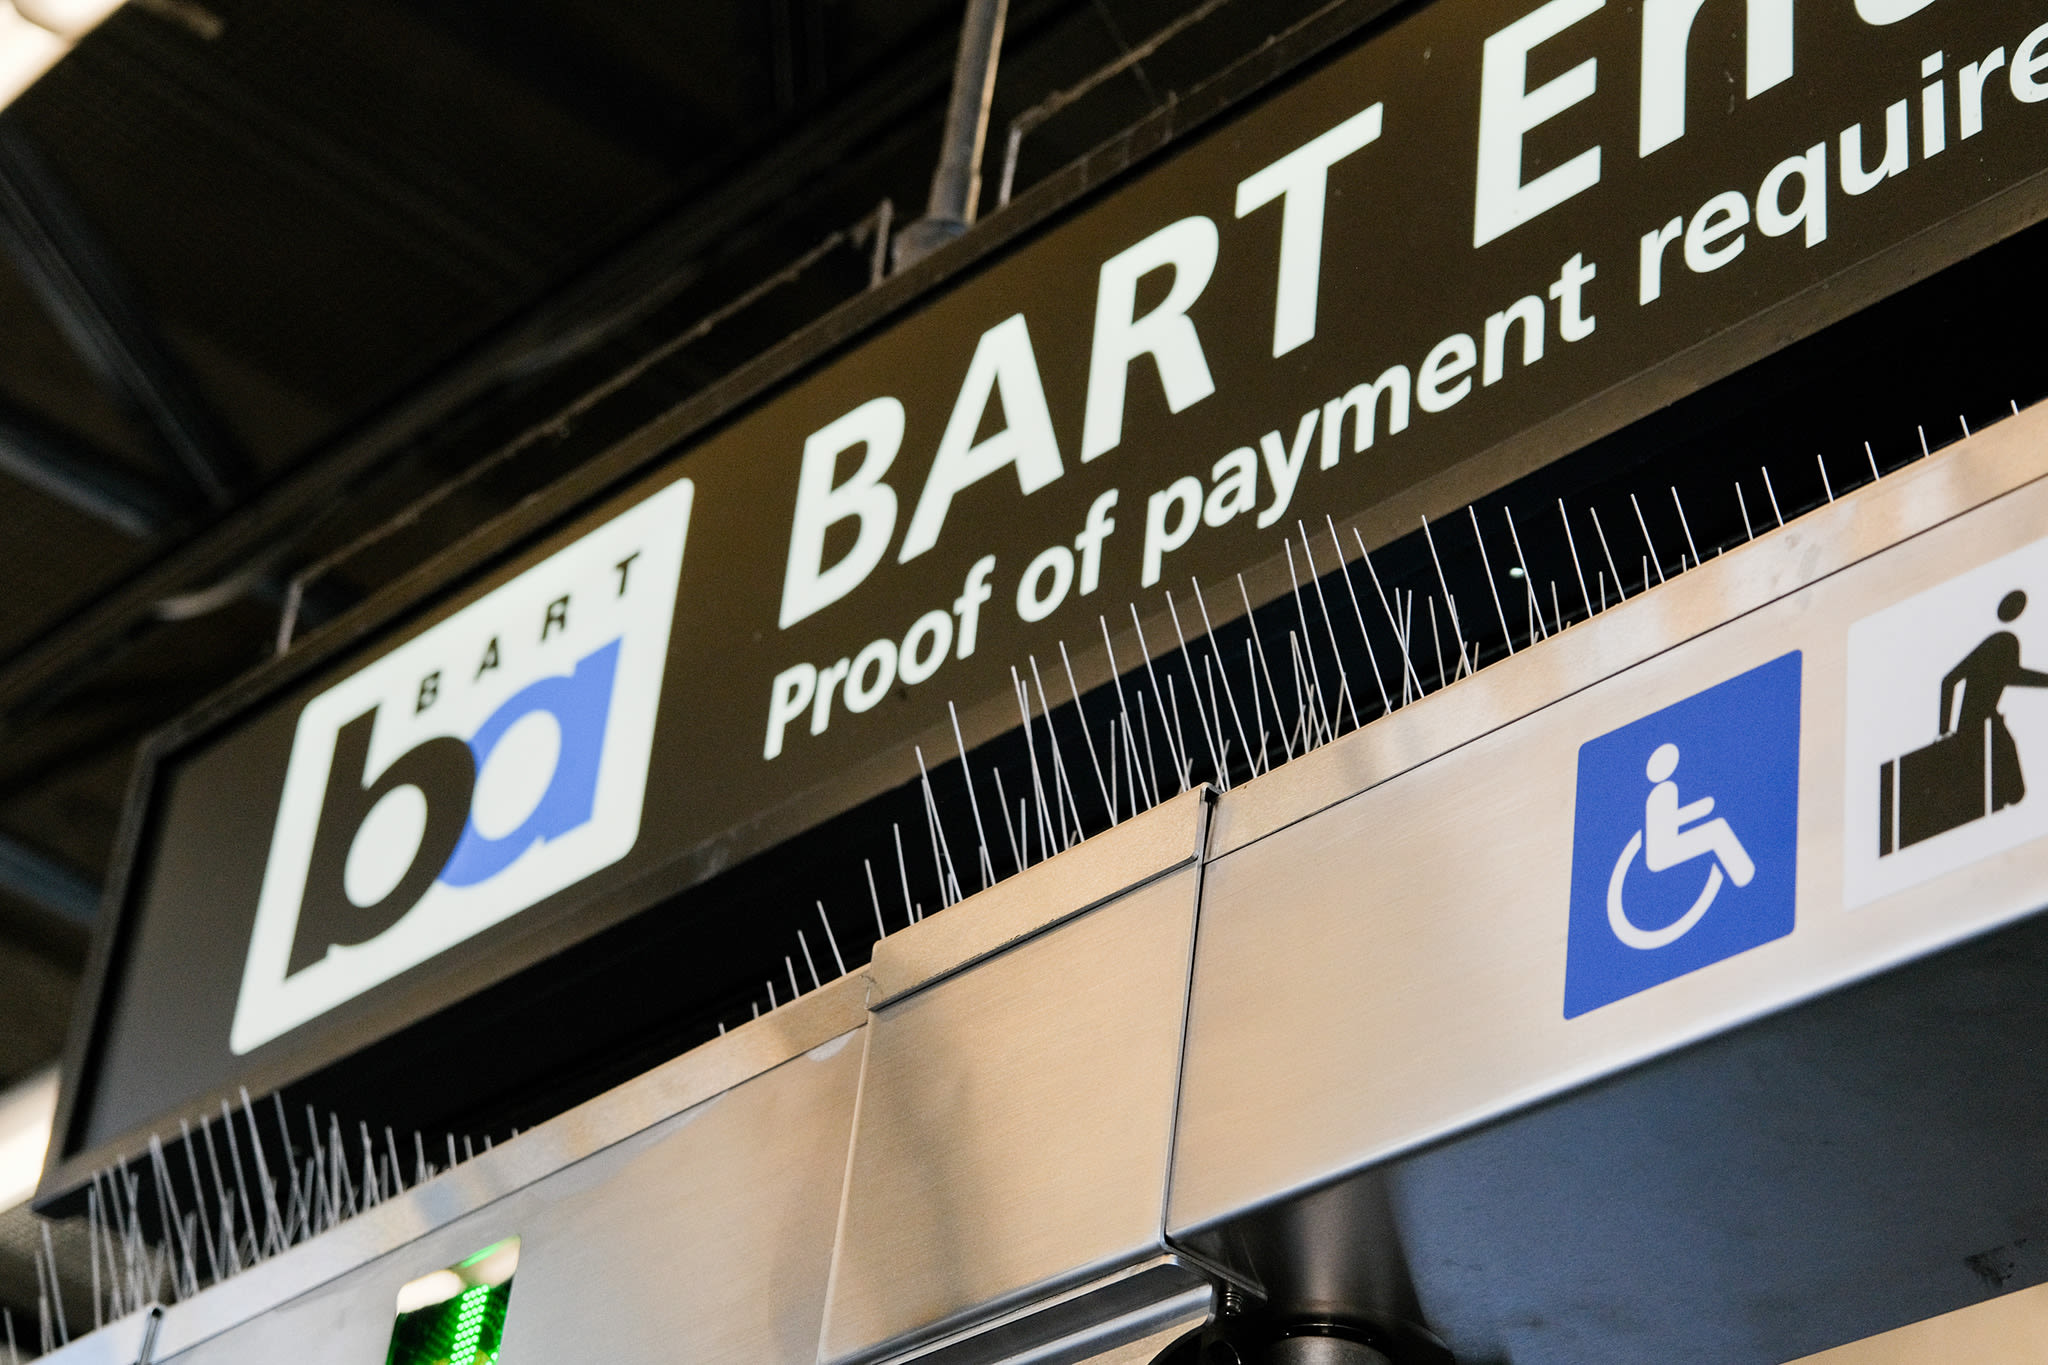 BART service across much of SF will be suspended this weekend